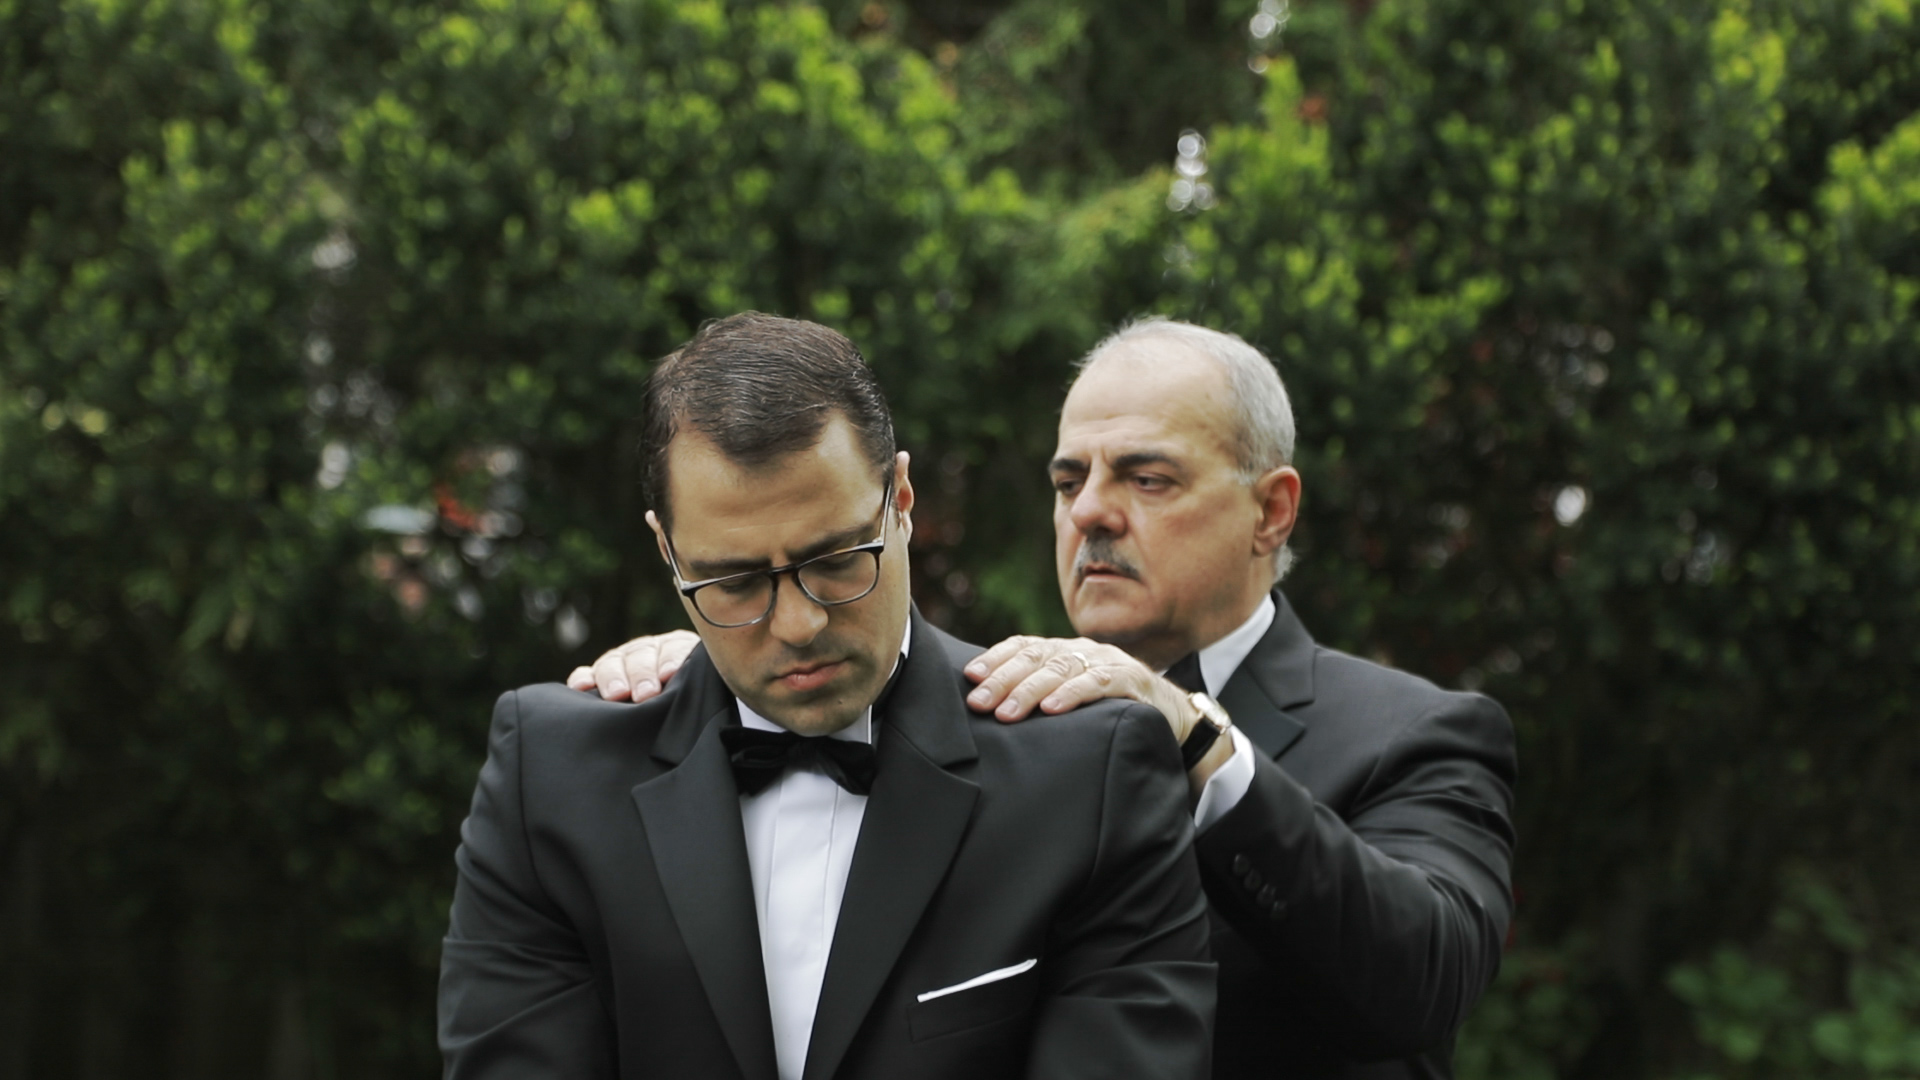 Groom and his father before the wedding